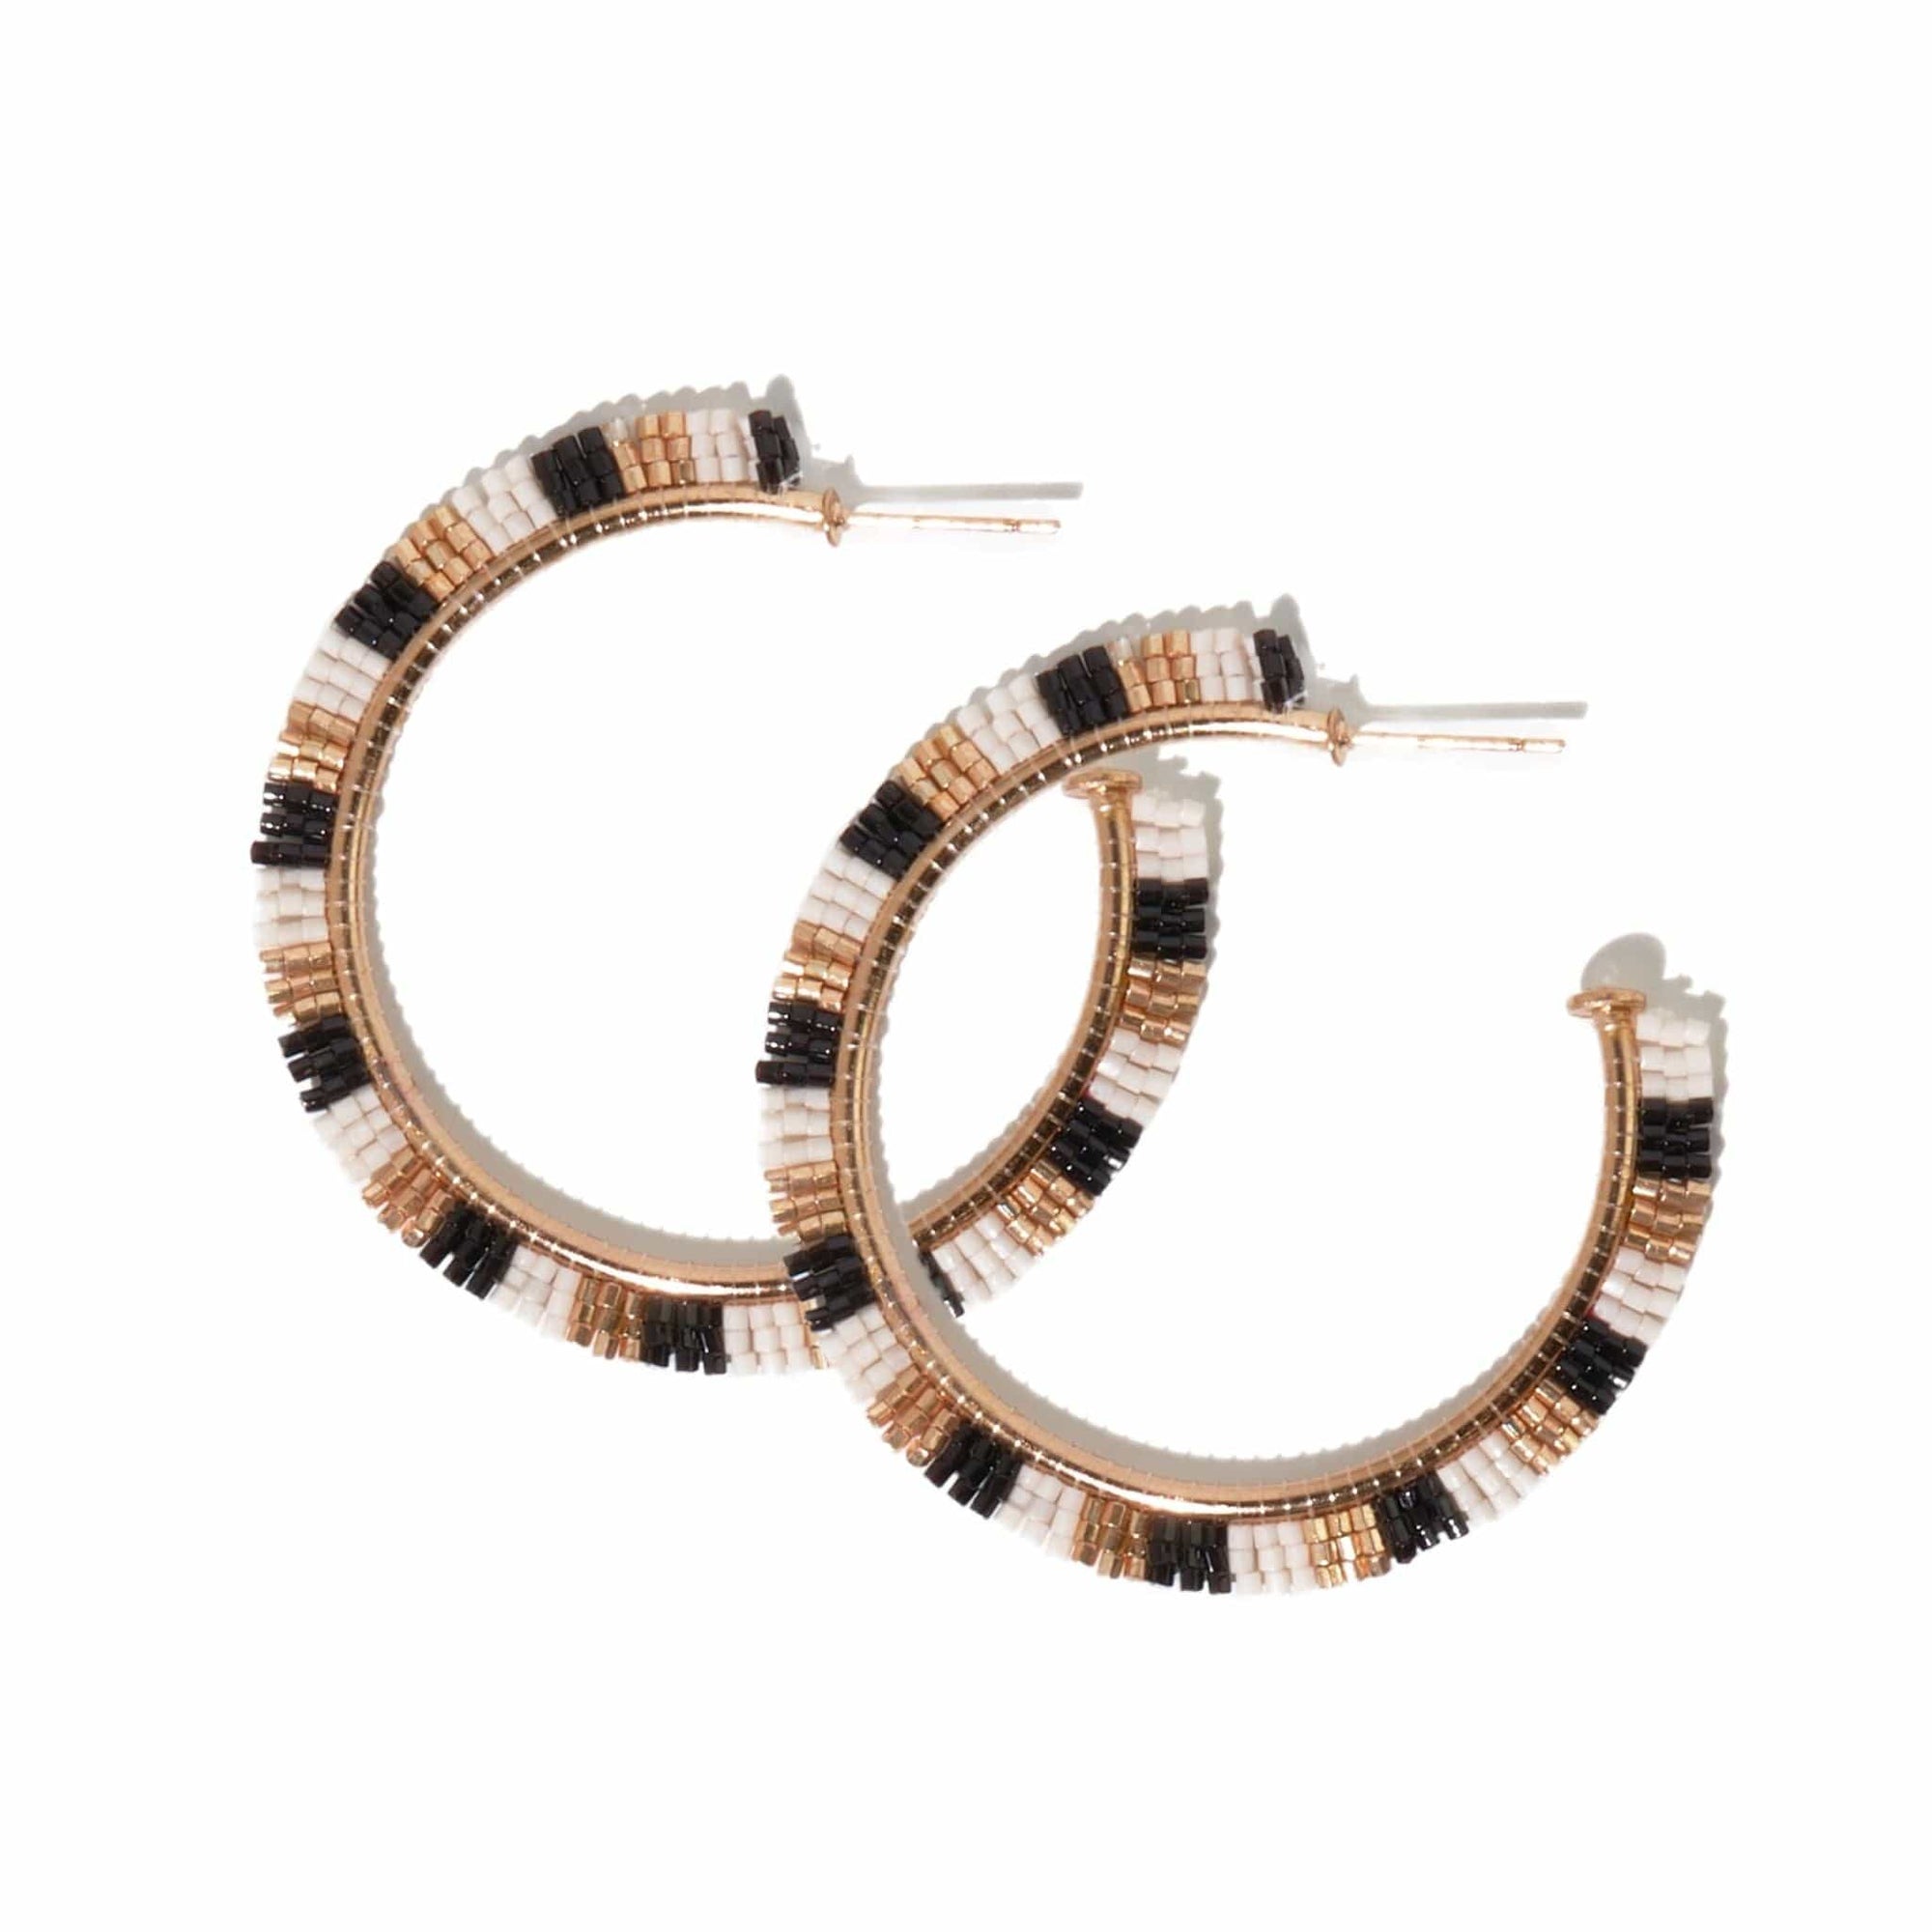 Nora Striped Hoop Earrings Black and White Wholesale